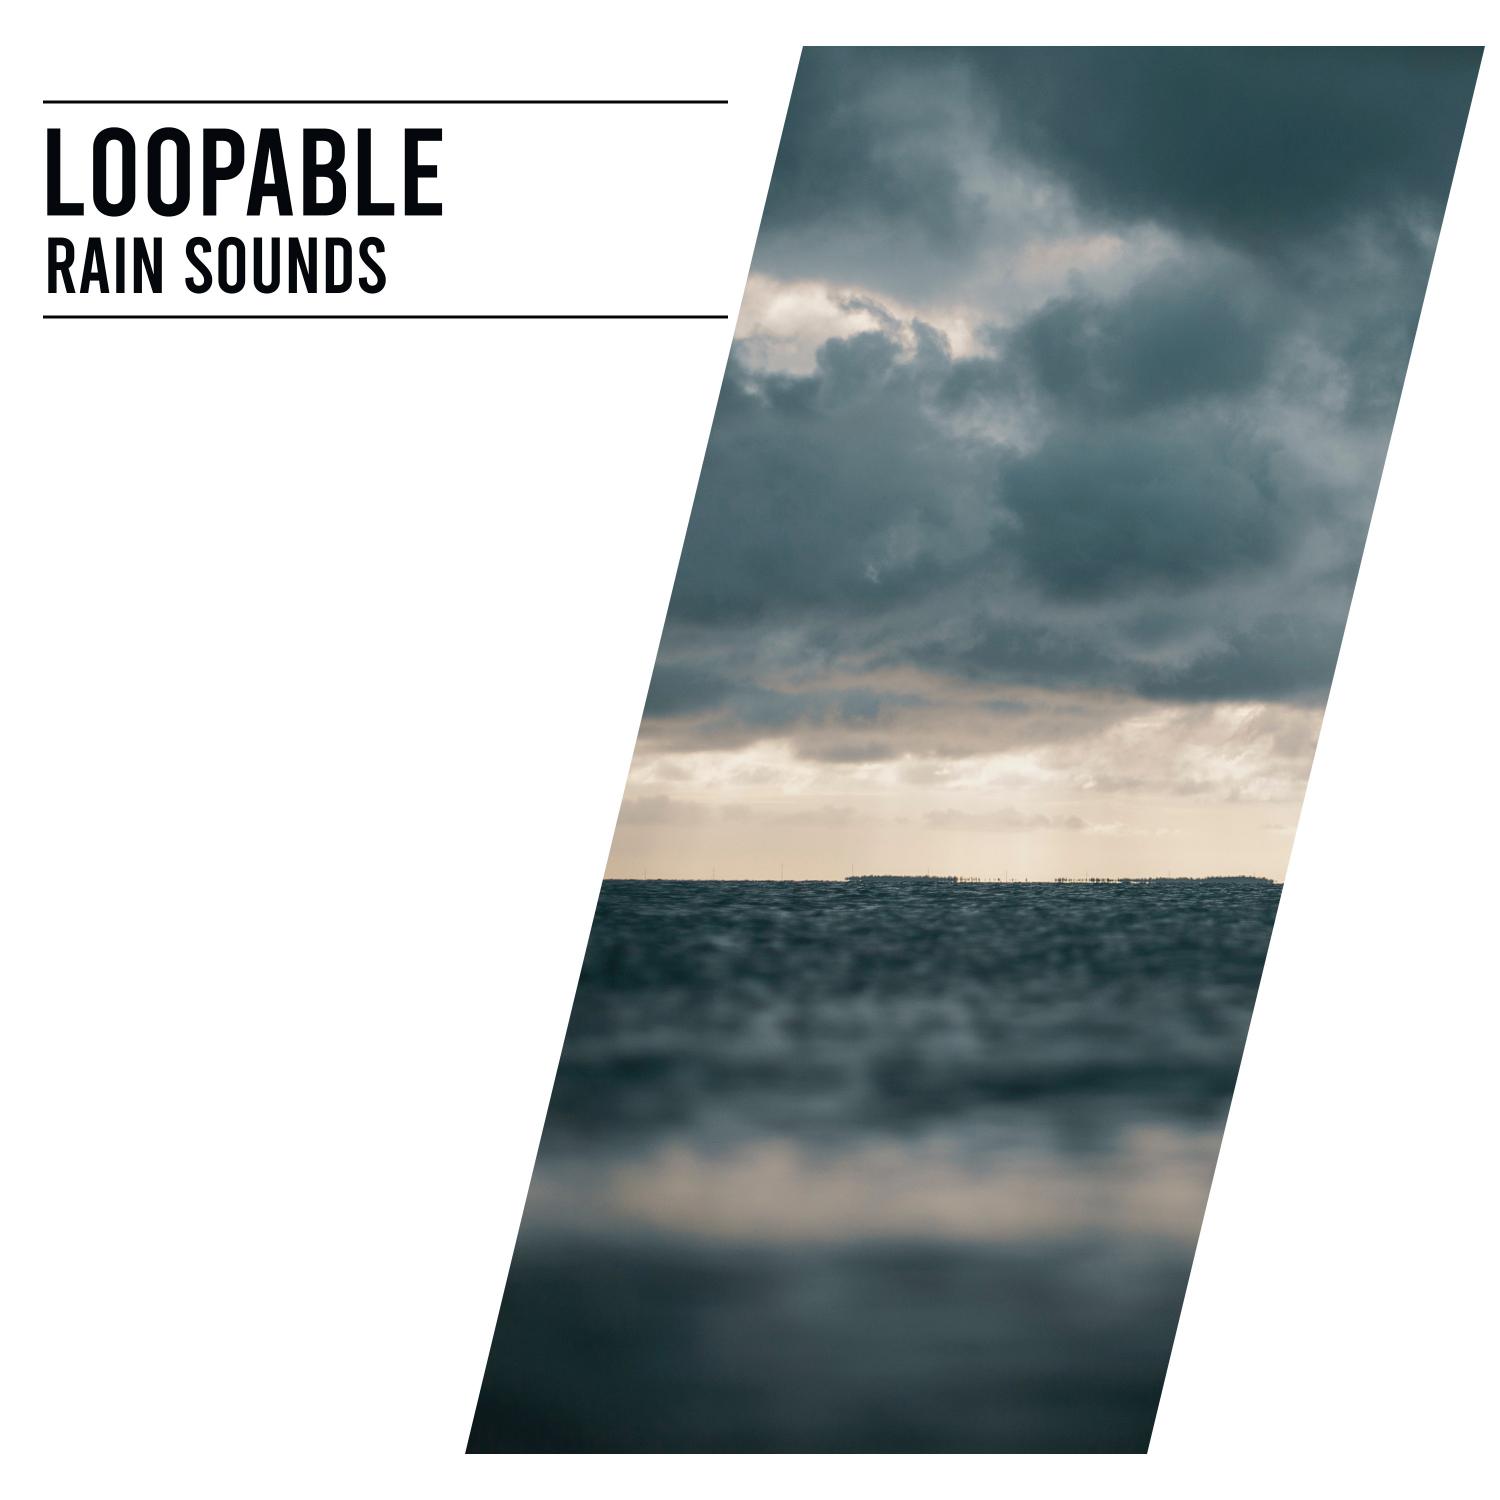 18 Loopable Rain Sounds All Night